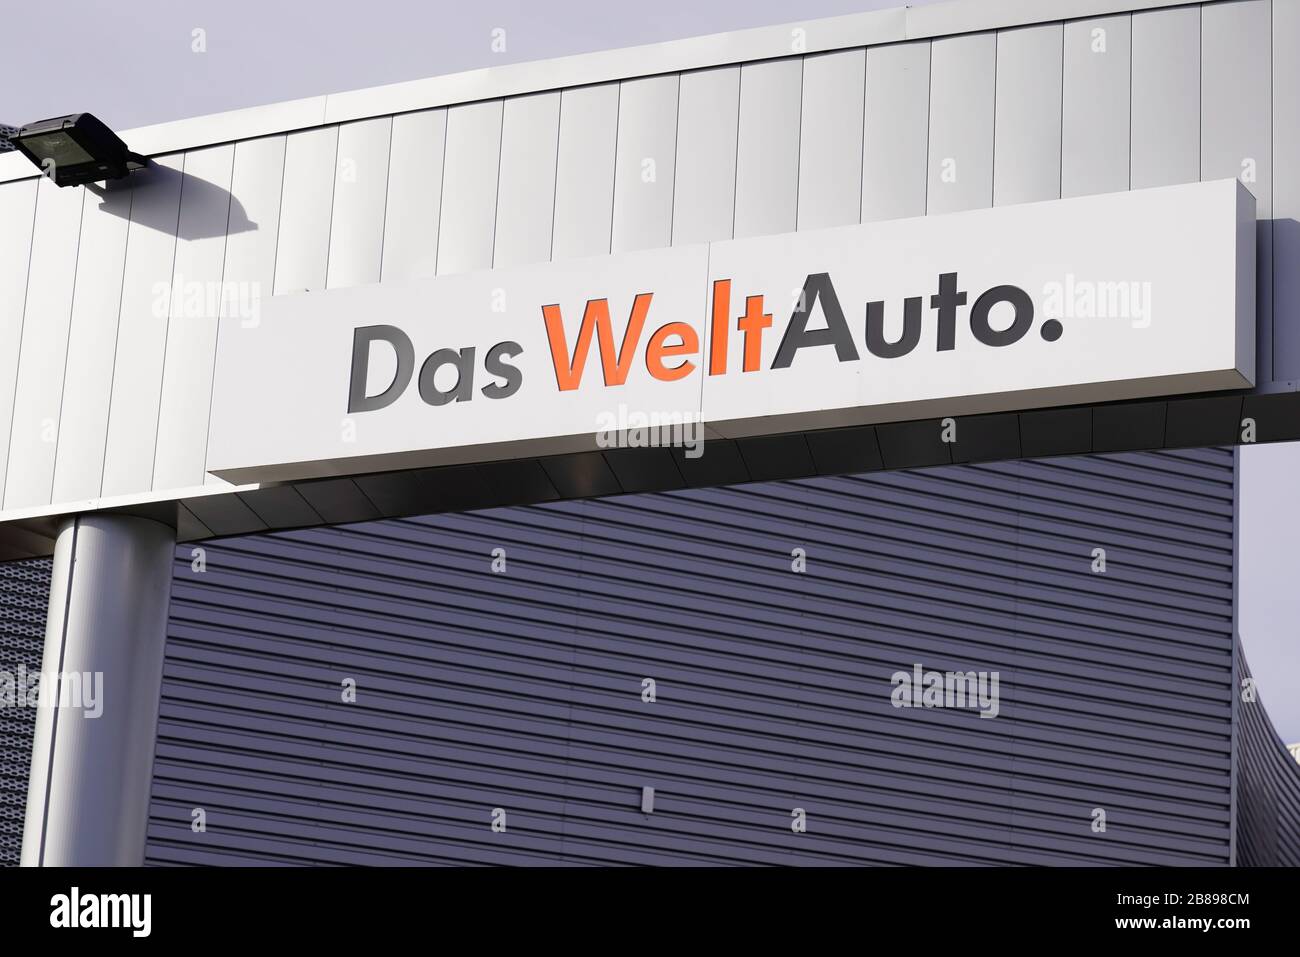 Bordeaux , Aquitaine / France - 10 27 2019 : Das WeltAuto sign store means used car world in Volkswagen dealership Stock Photo